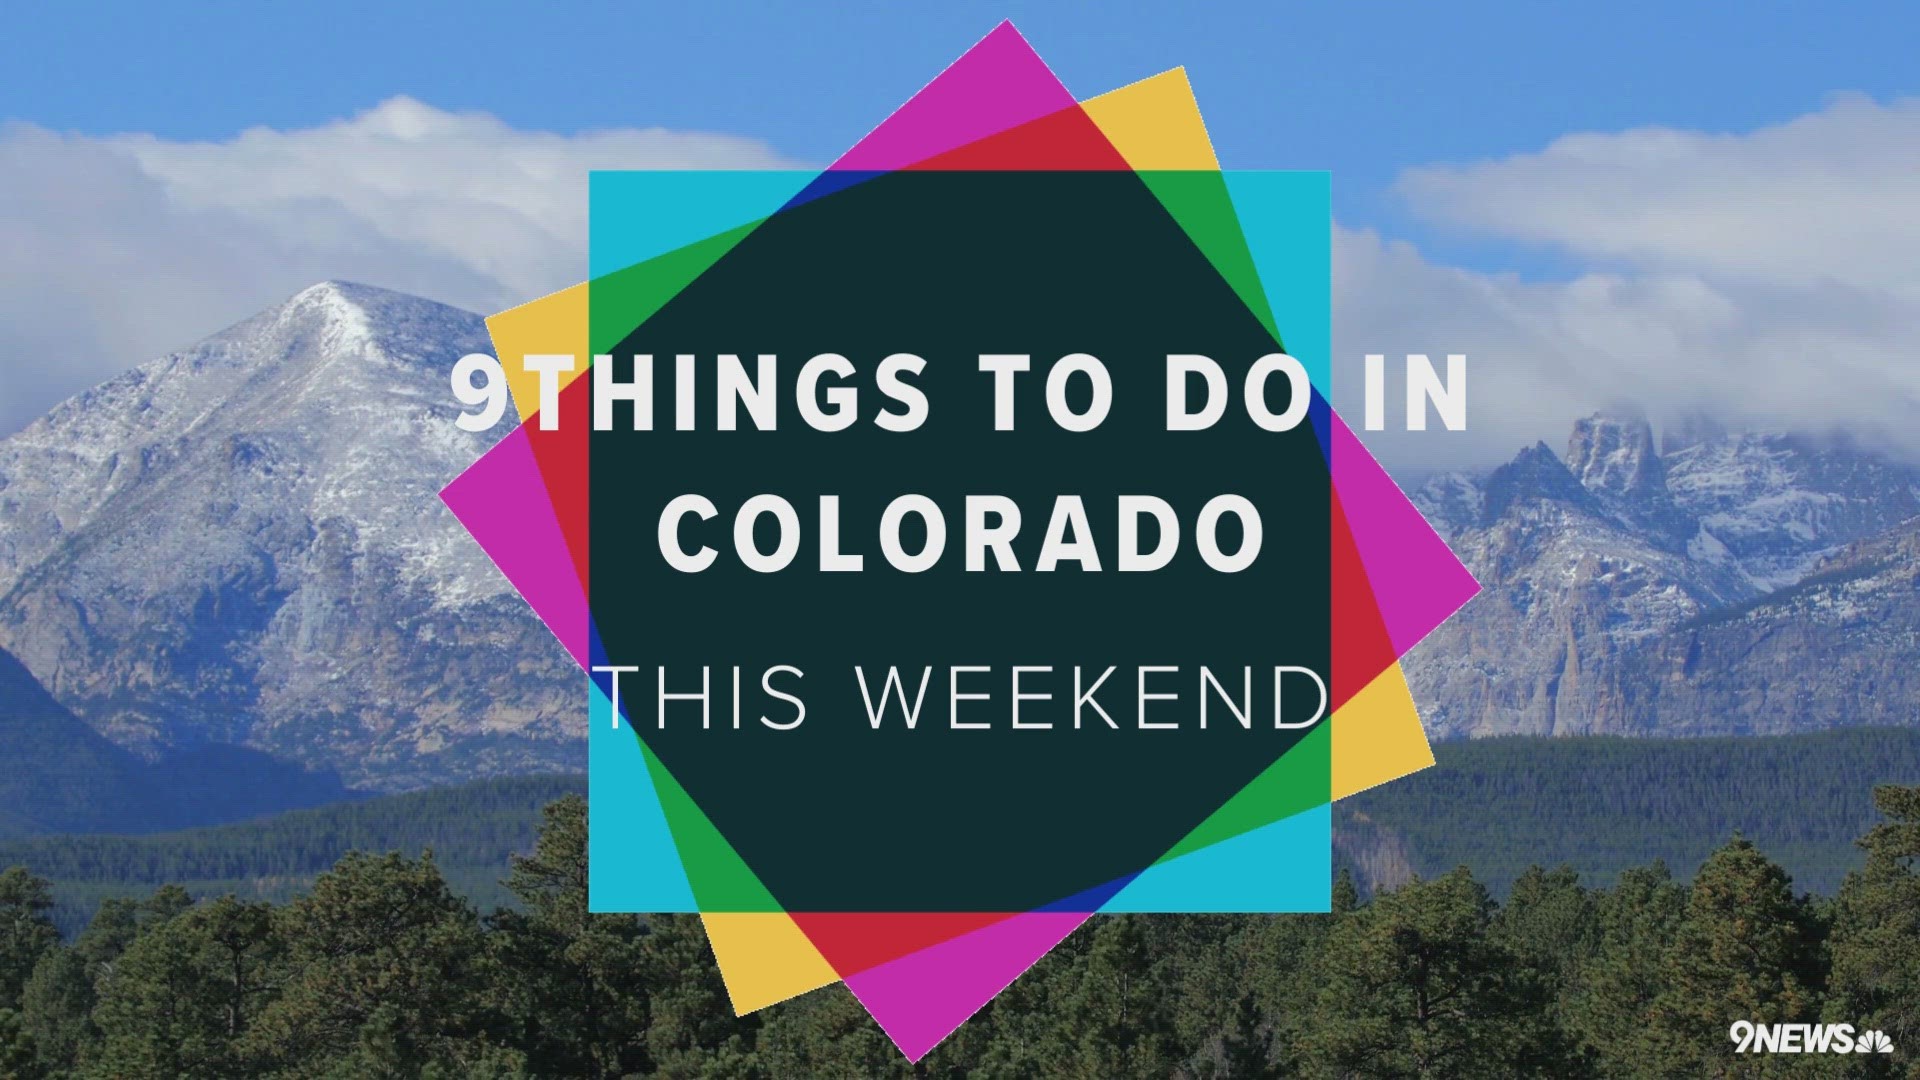 Red Rocks concerts begin, the first farmers markets open, and the Colorado Mountain Pie turns 50.